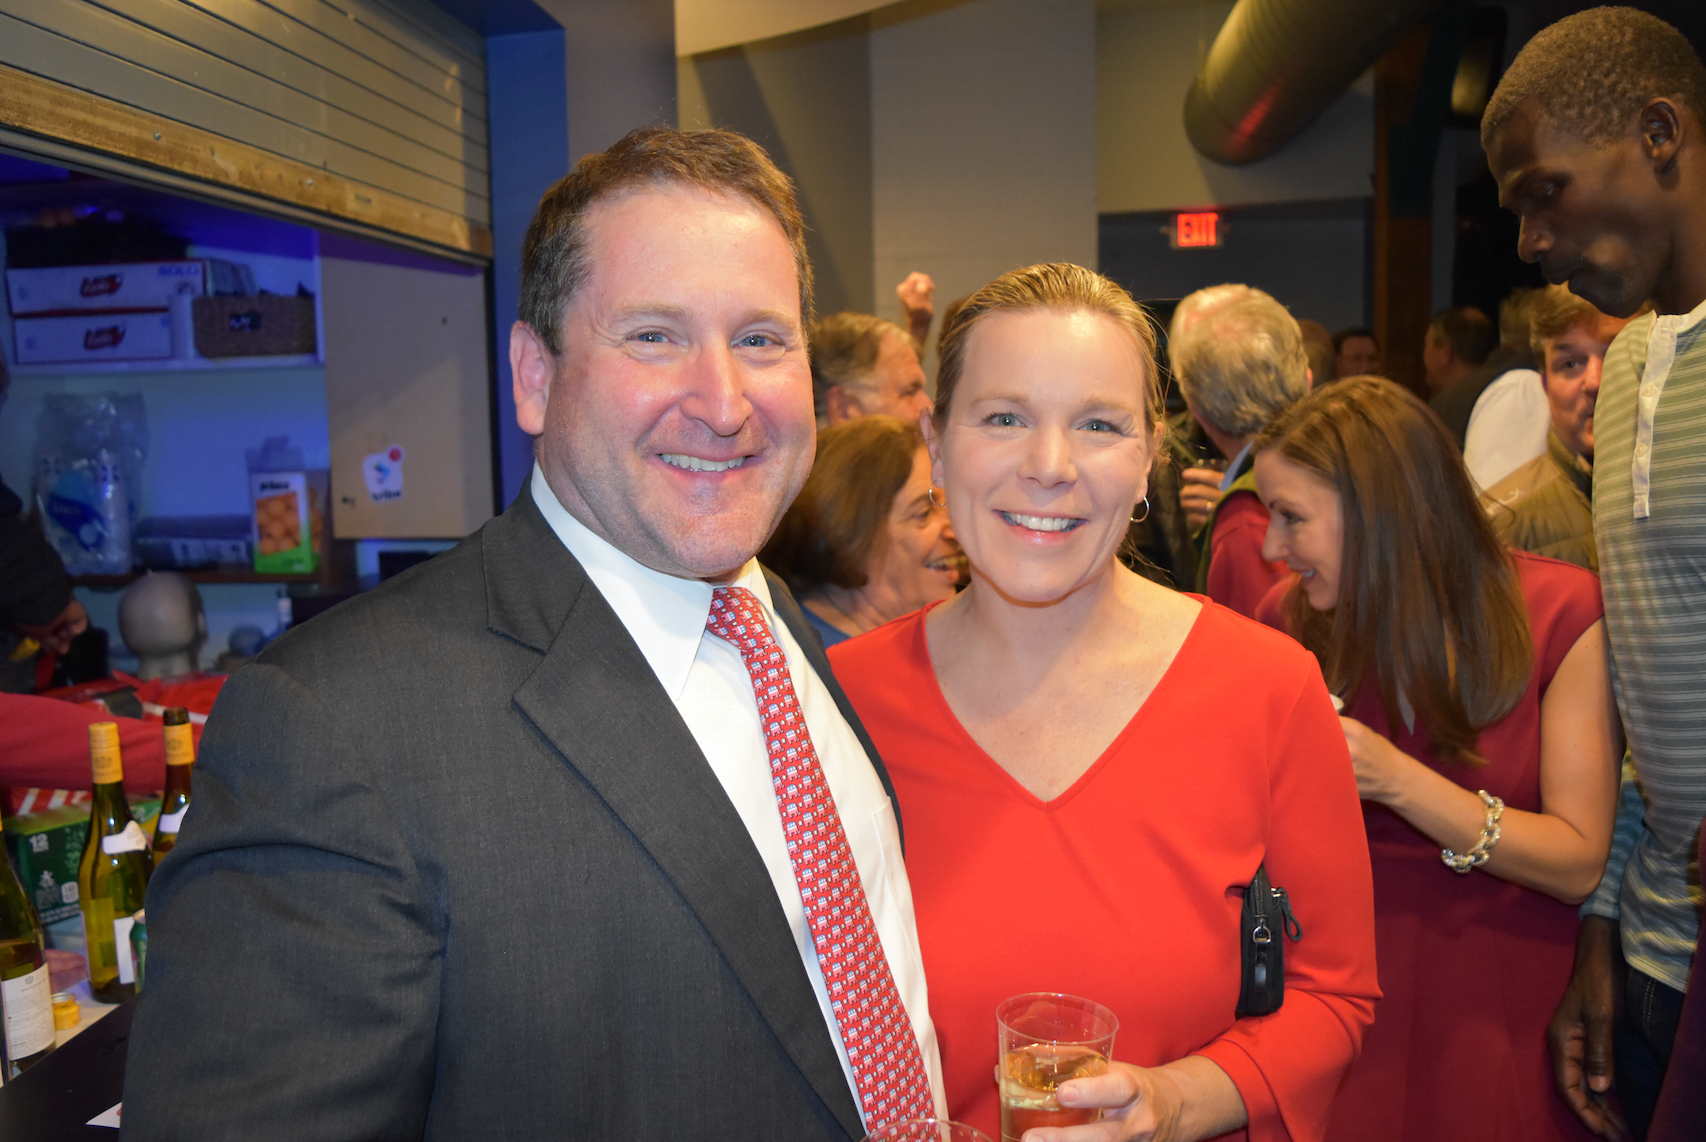 Rich and Cindy DiPreta at the Teen Center celebrated the Repubicans' victories. Nov 5, 2019 Photo: Heather Brown